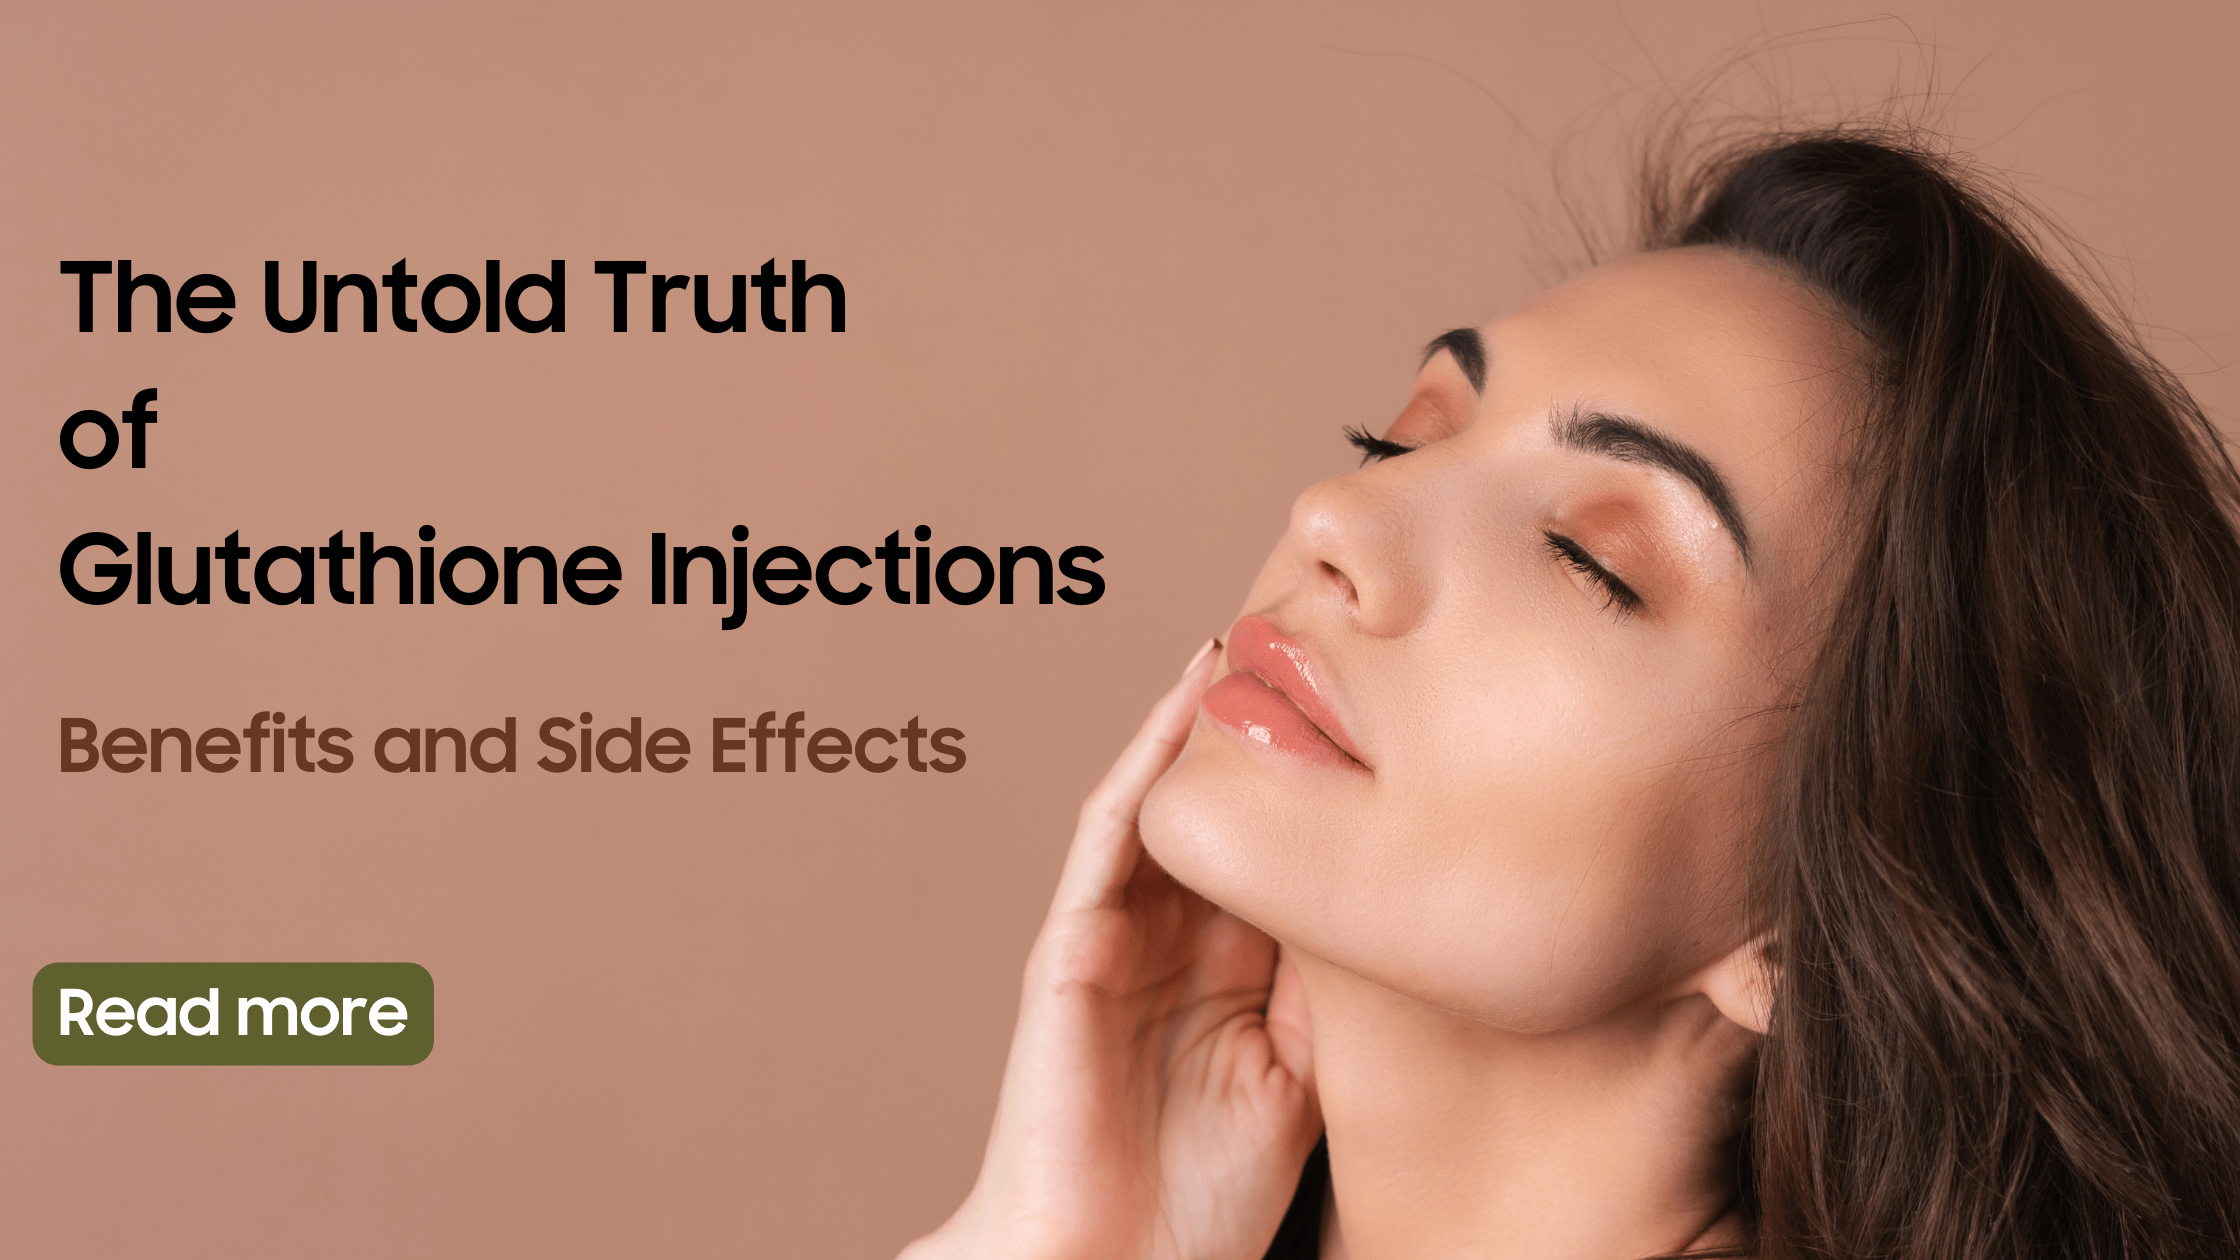 The Untold Truth of Glutathione Injections Benefits and Side Effects